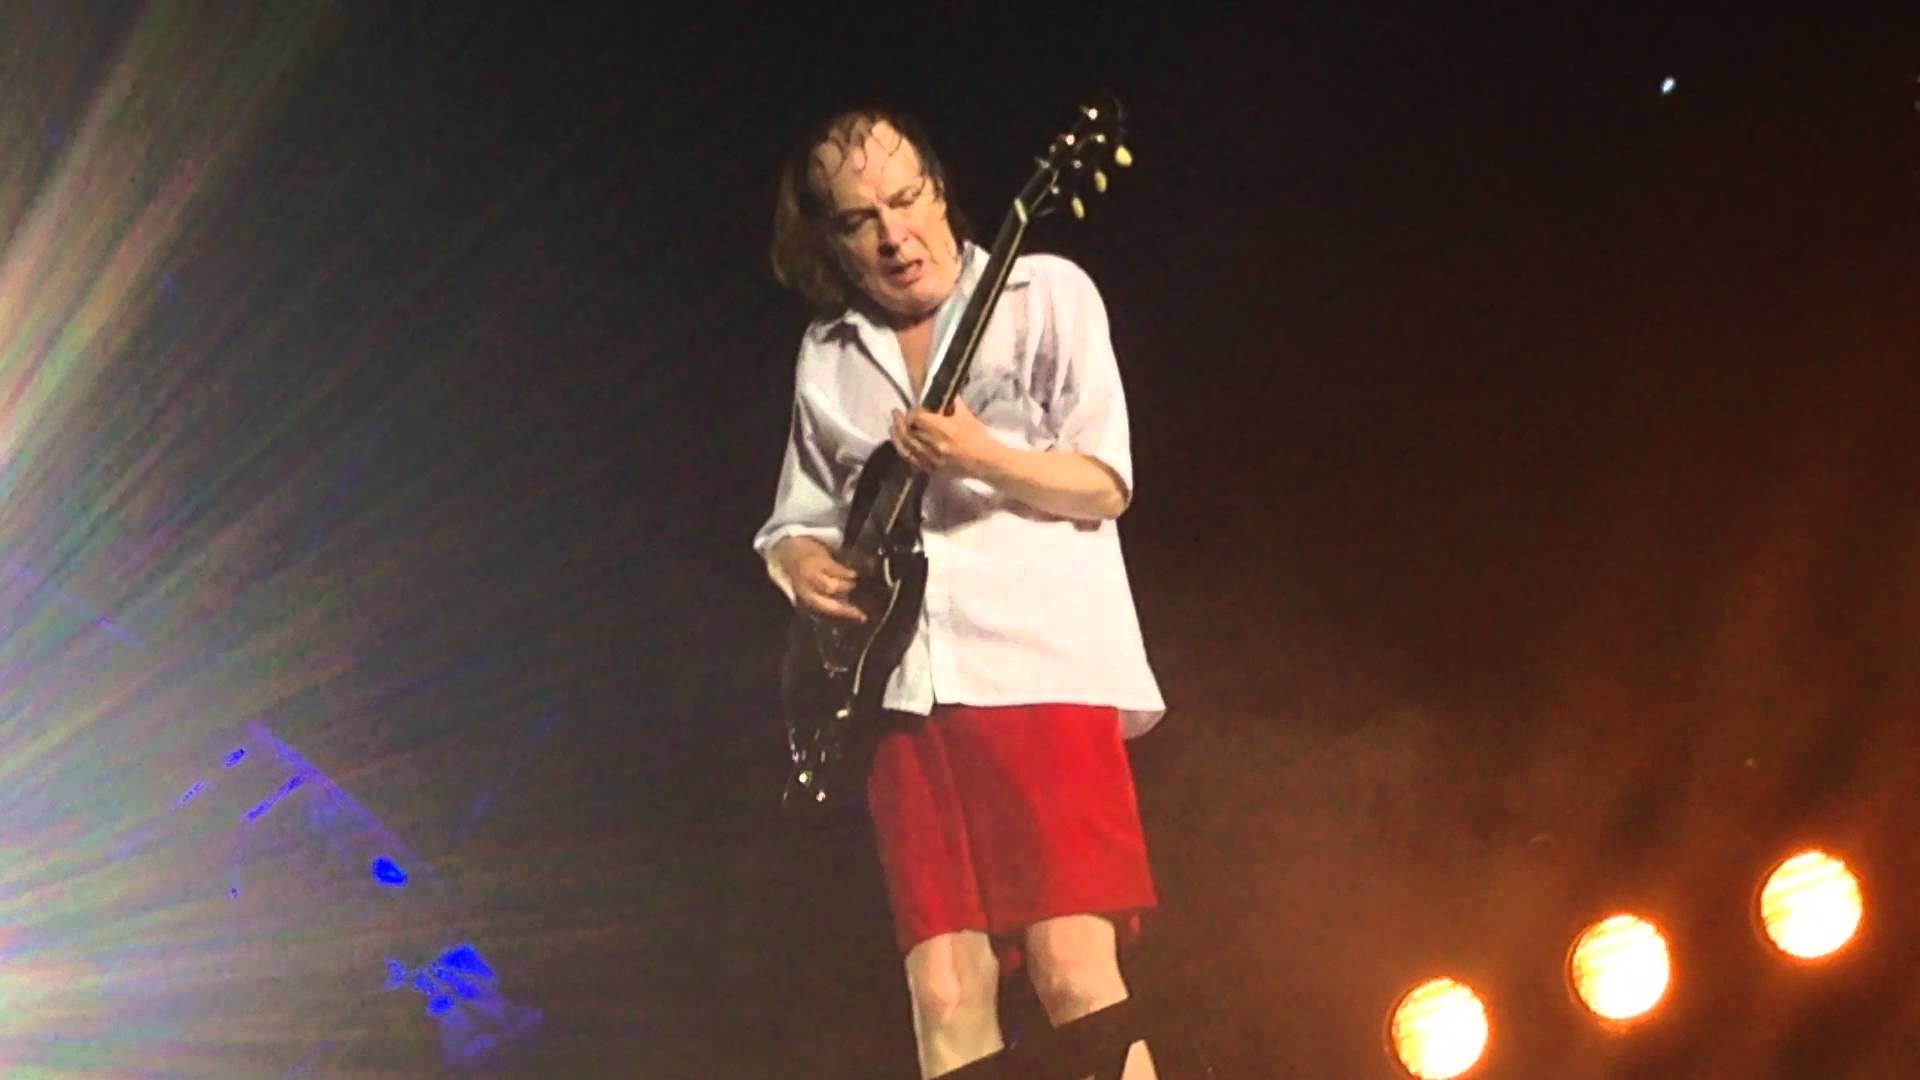 1920x1080 Angus Young Guitar Solo Live - ACDC 23.05.2015 Paris STADE DE FRANCE -  YouTube